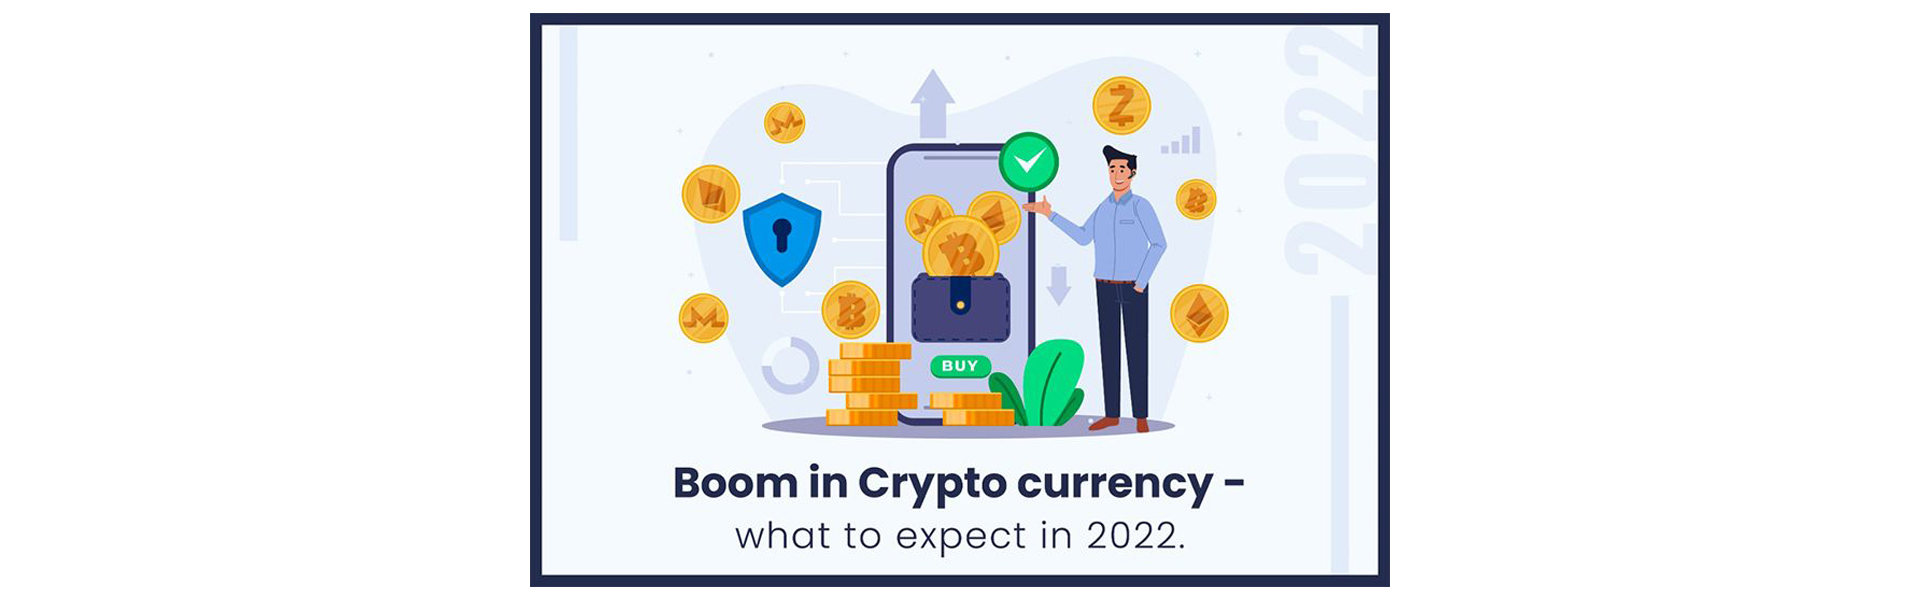 Cryptocurrency Trend – what to expect in 2022